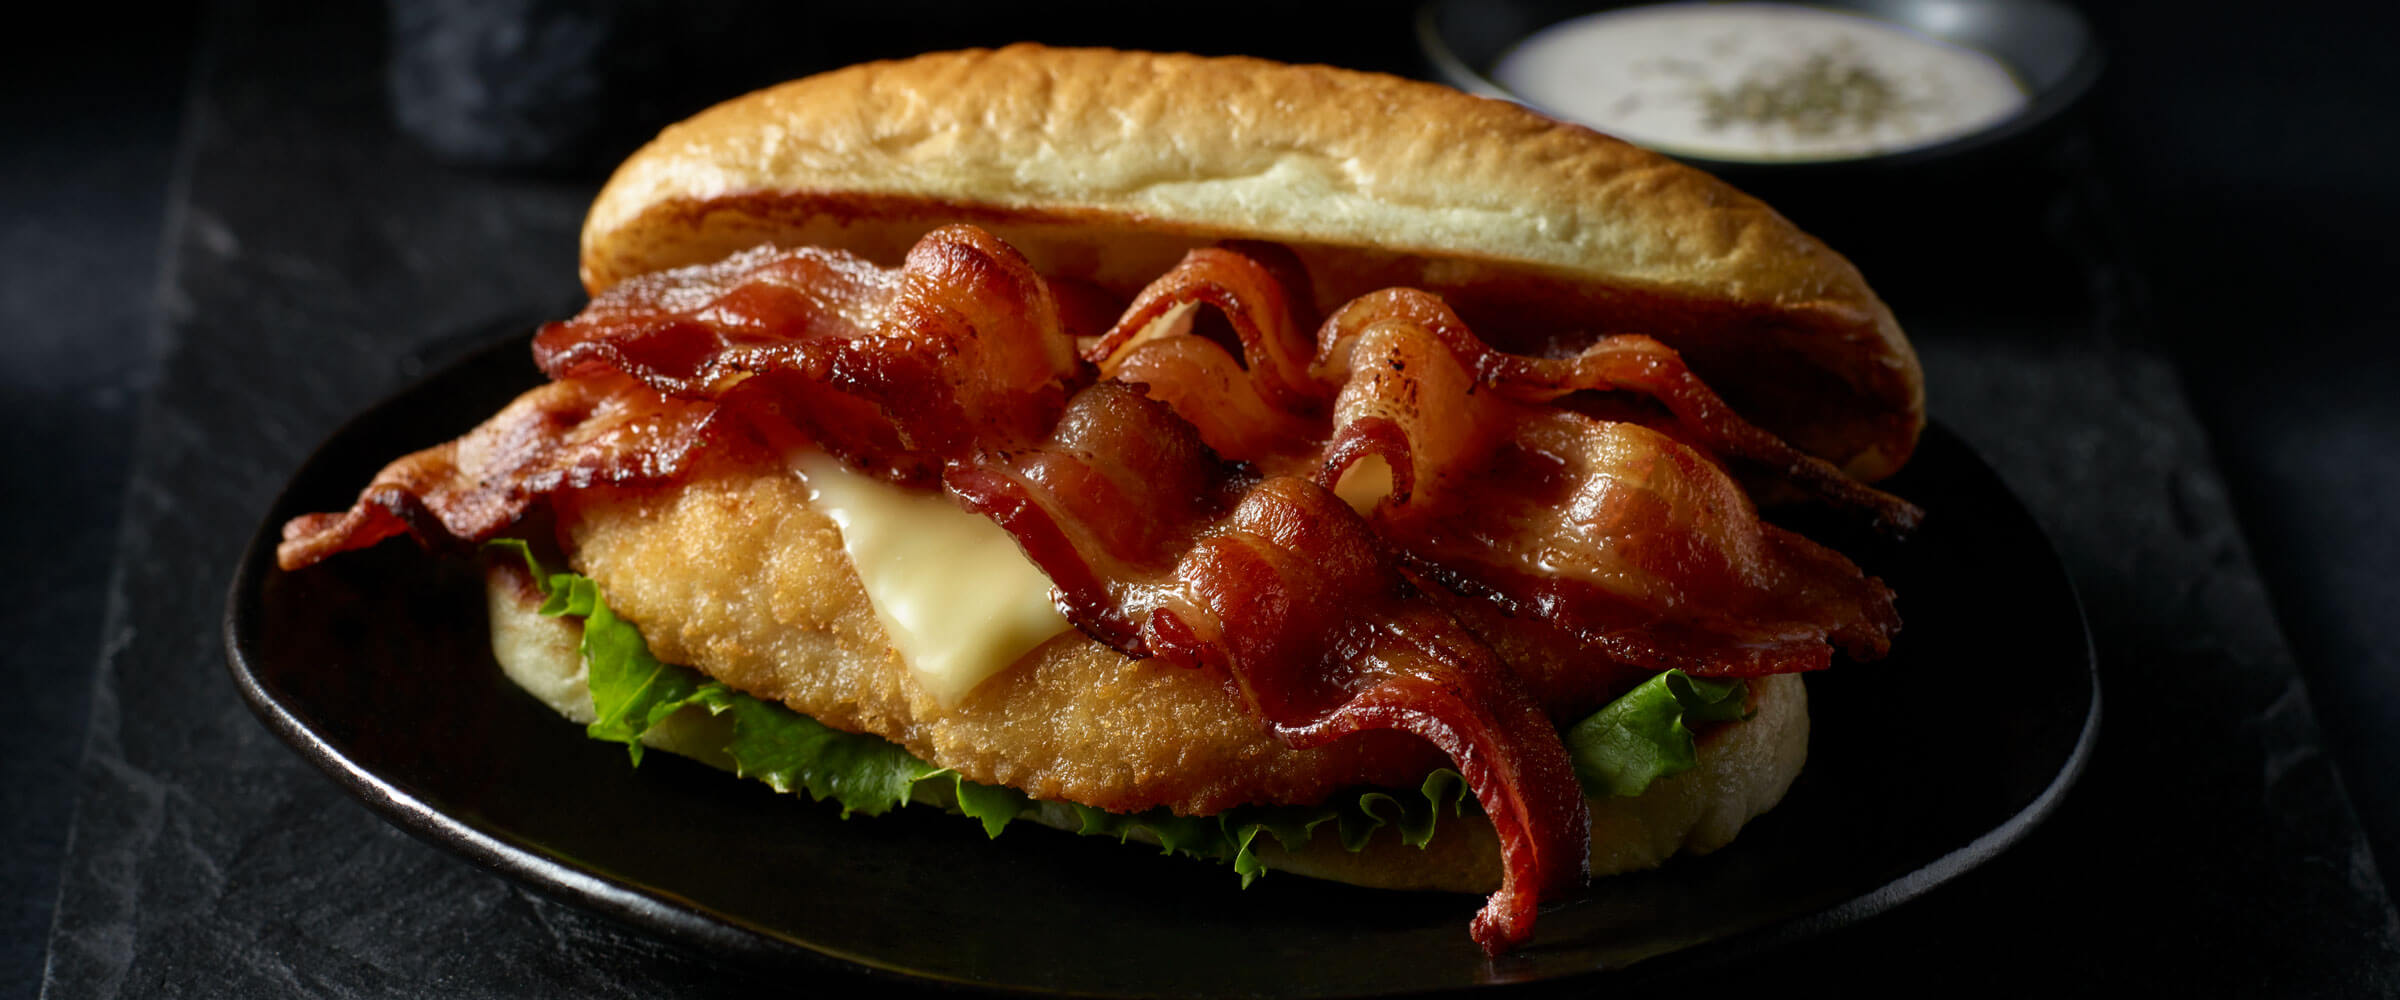 Bacon Chicken Sandwich on black plate with dipping sauce